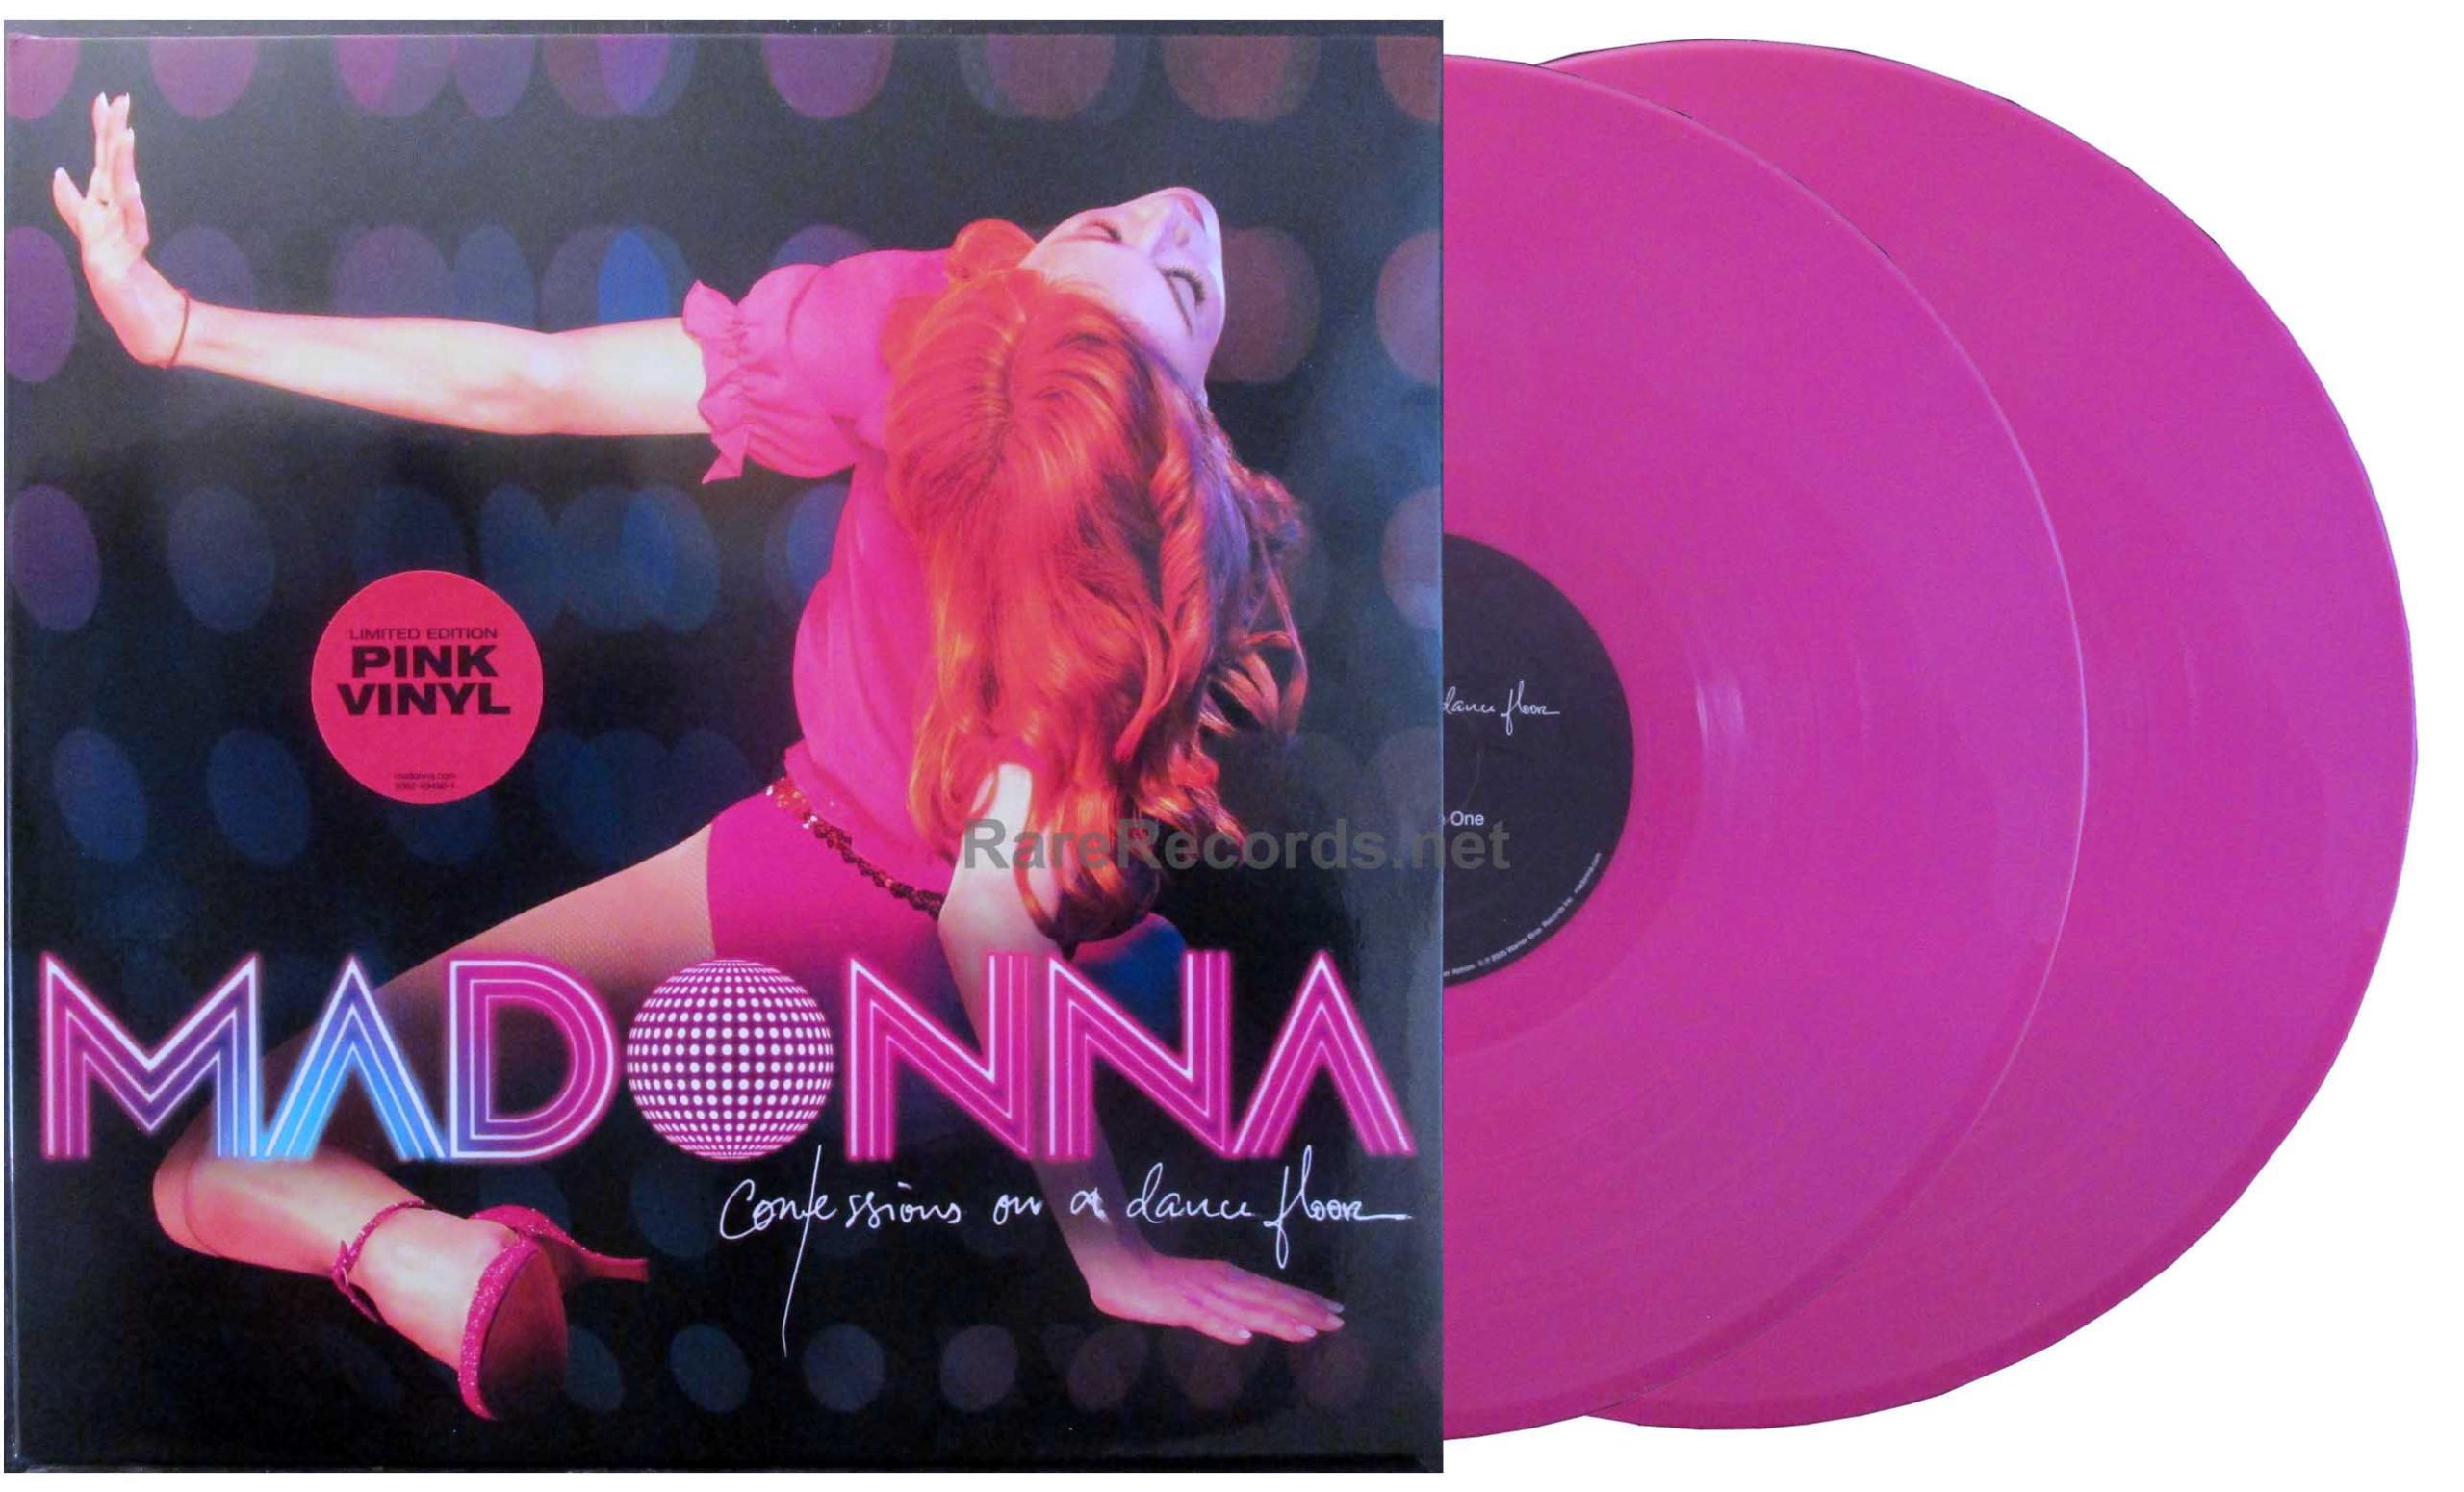 https://www.rarerecords.net/wp-content/uploads/madonna_confessions_pink_ce7-scaled.jpg